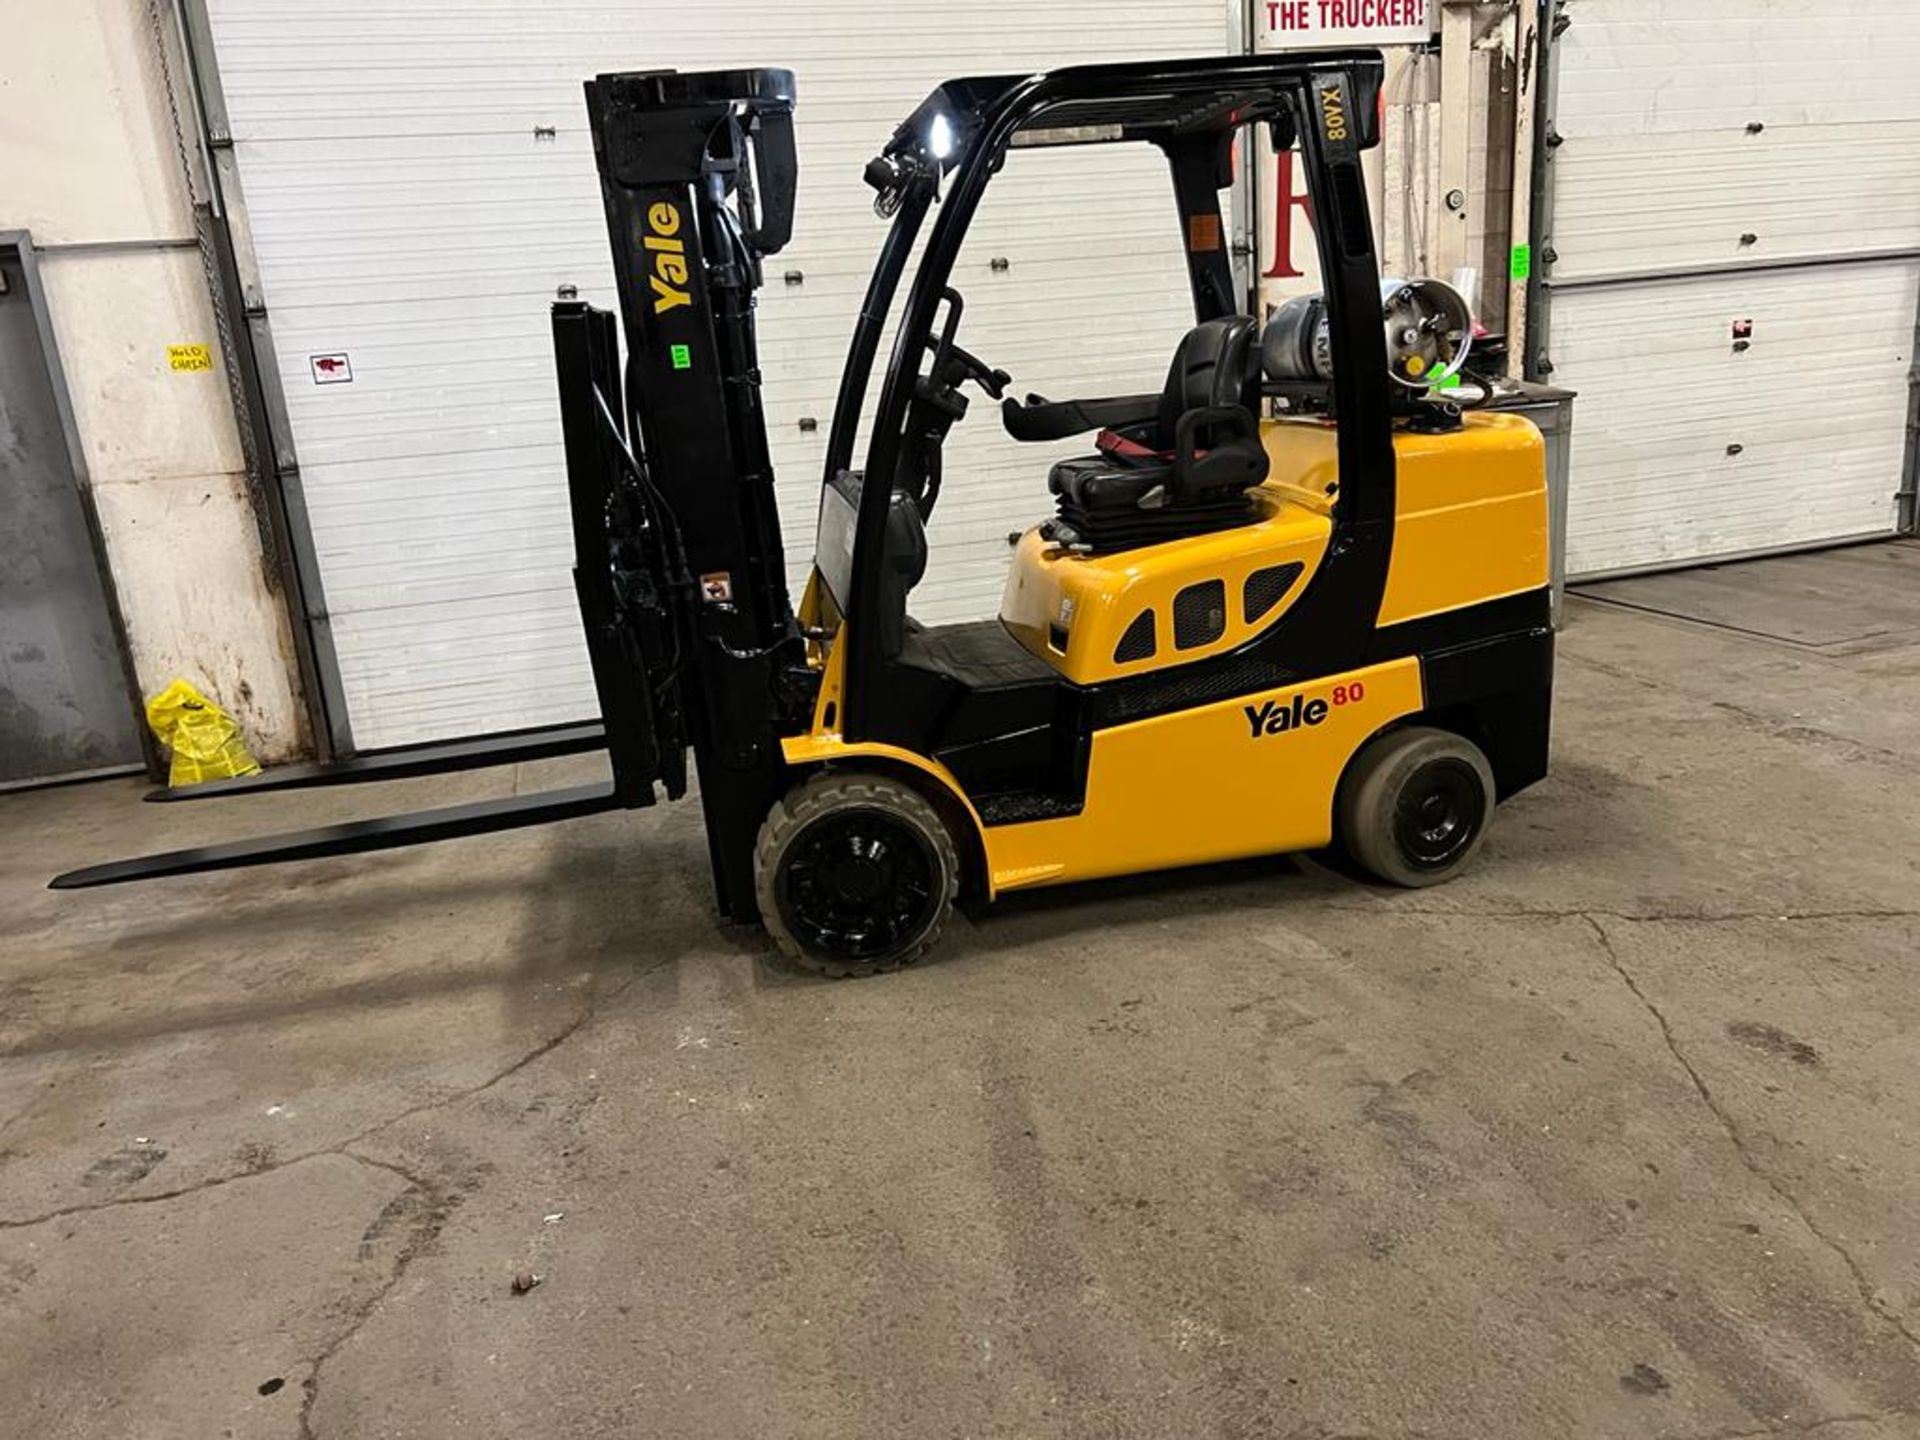 FREE CUSTOMS - NICE 2017 Yale model 80 - 8,000lbs Capacity Forklift LPG (propane) with 54" forks